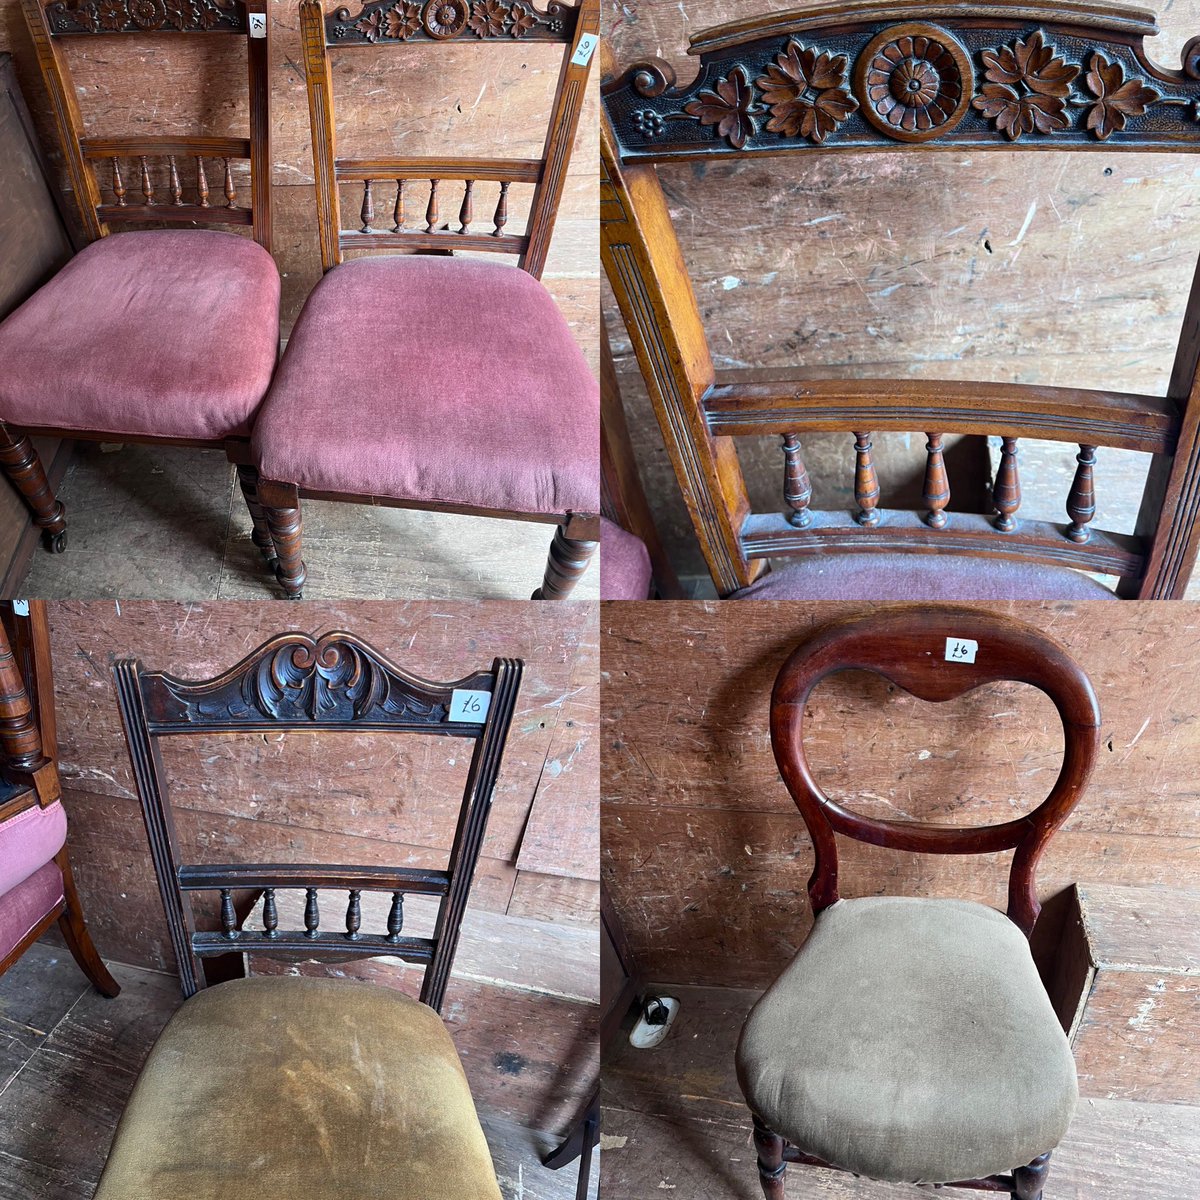 BTW this is what you can’t sell or give away. Victorian dining chairs. 
When I started in this business people actively sought out these and reupholstered/recovered the seats. Never mind, times change! 🤣